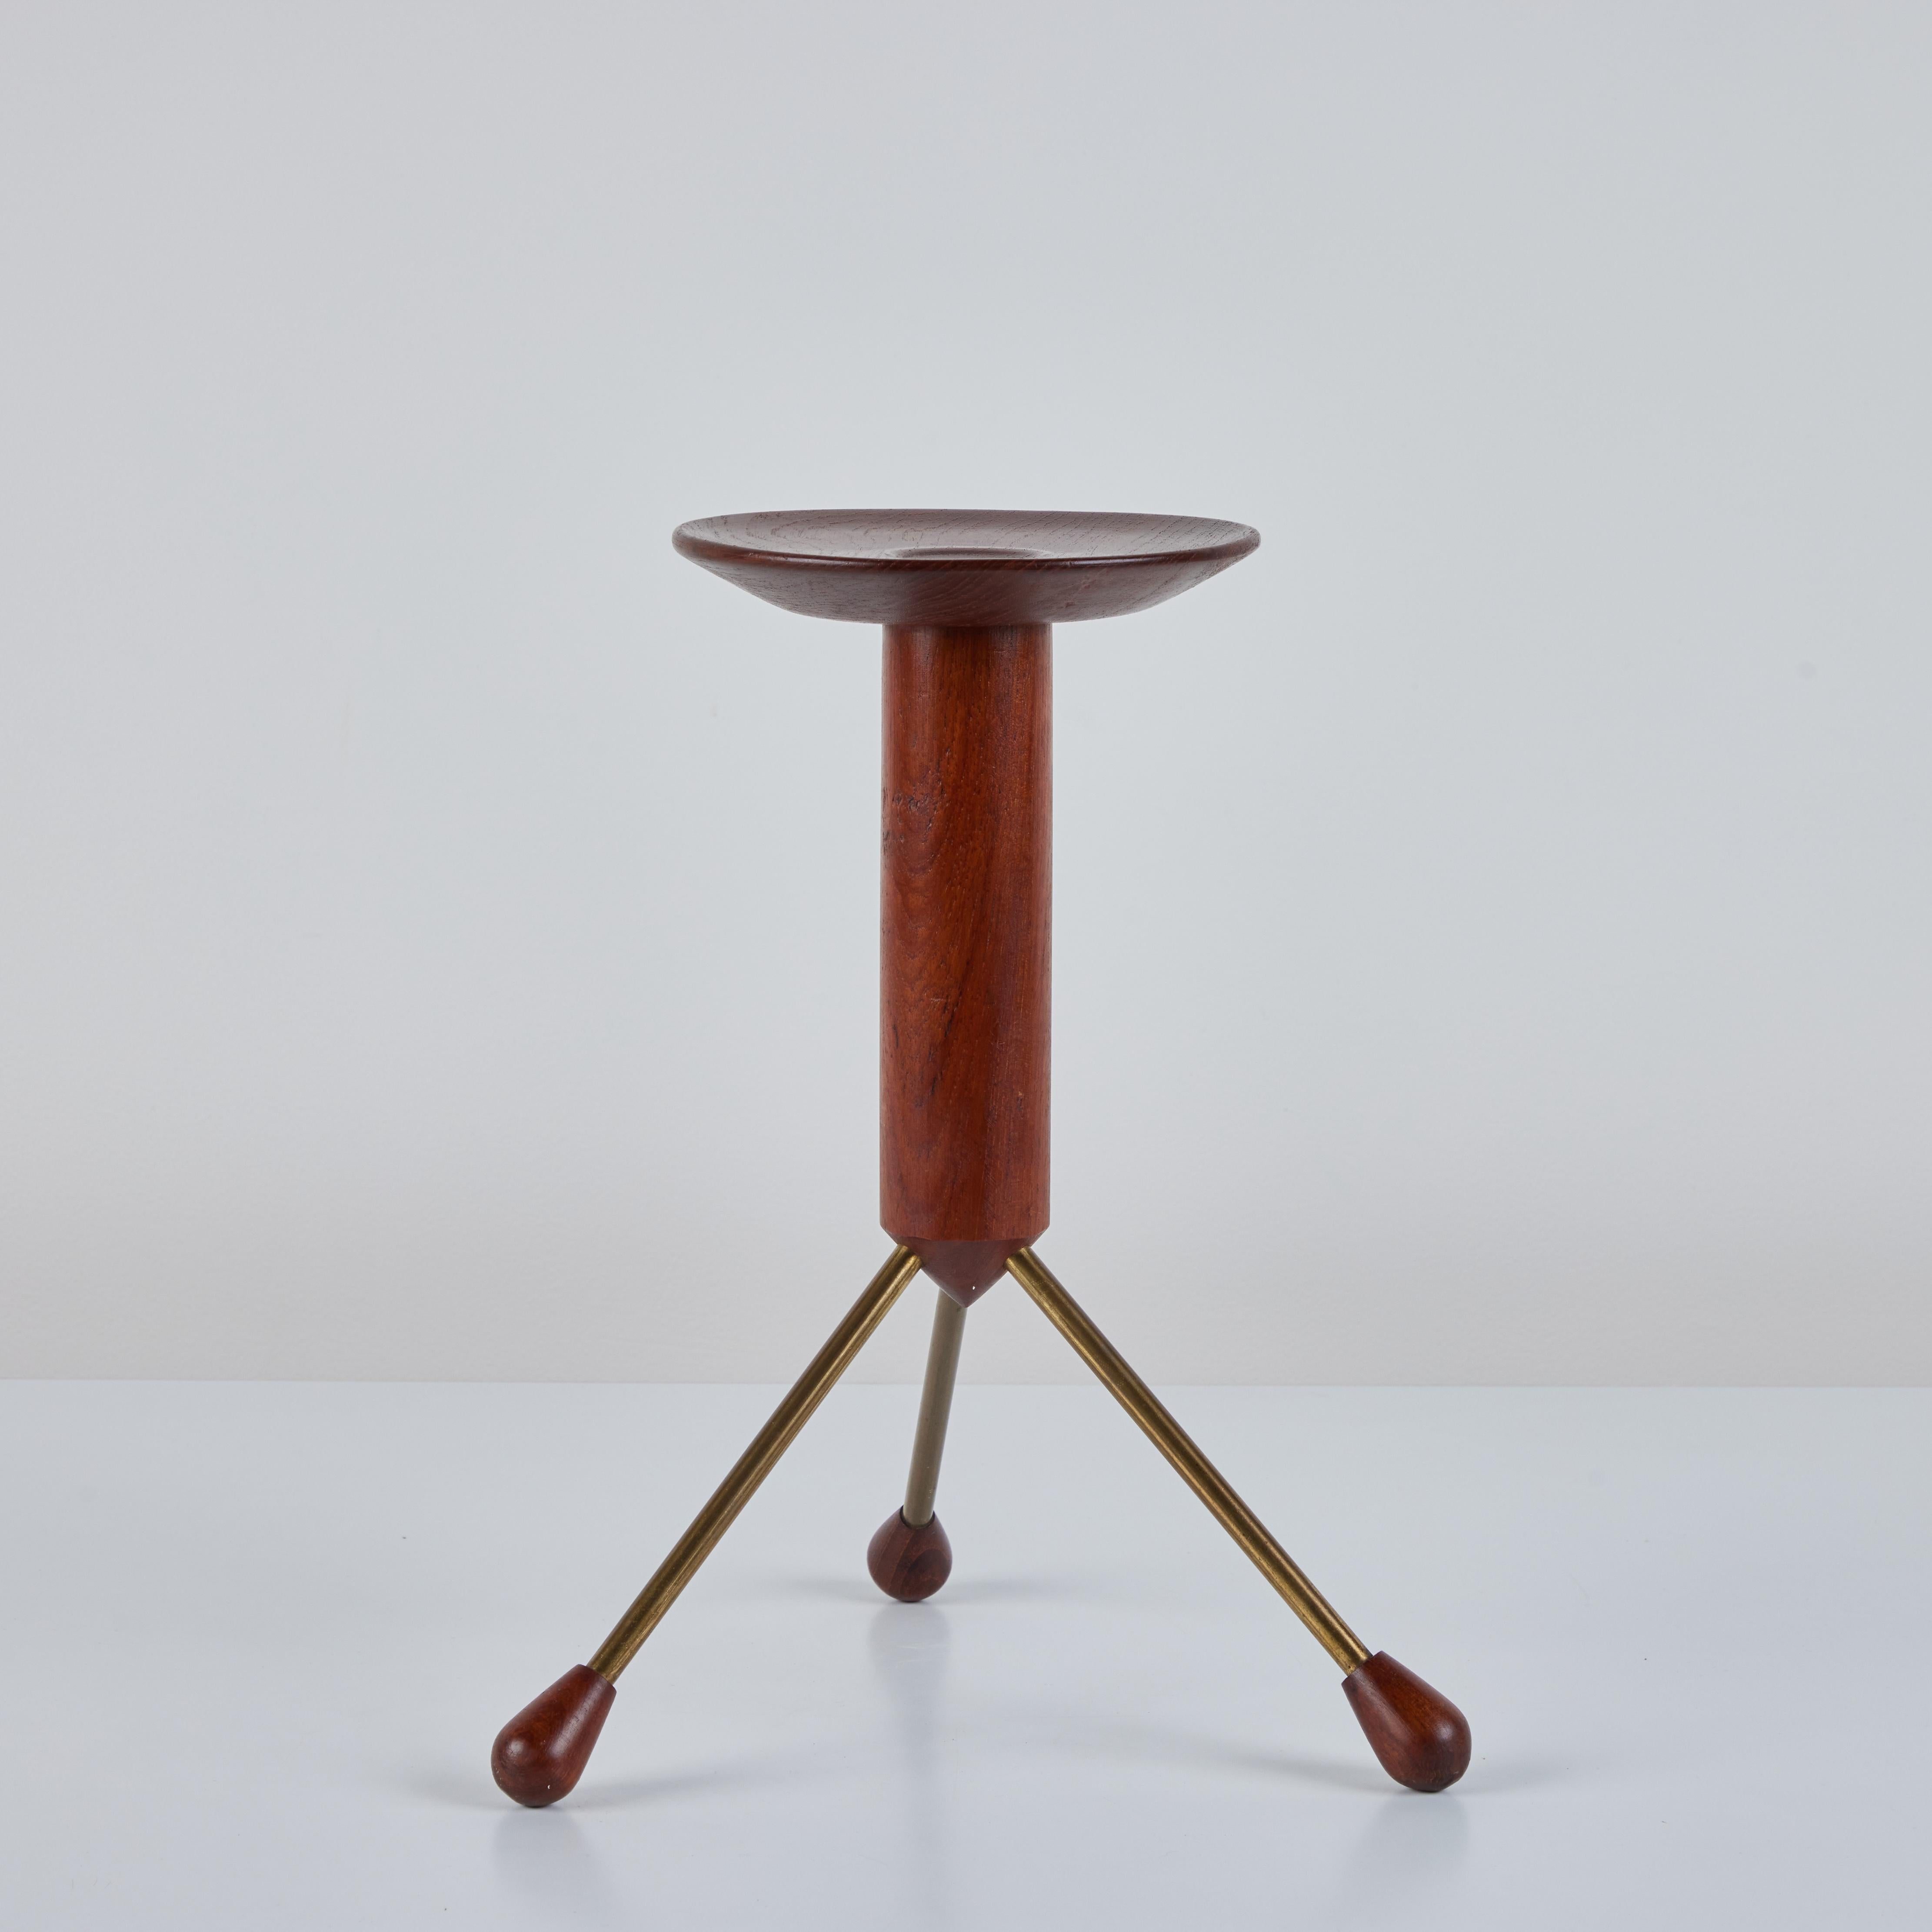 Swedish Teak and Brass Side Table by Albert Larsson for Alberts Tibro